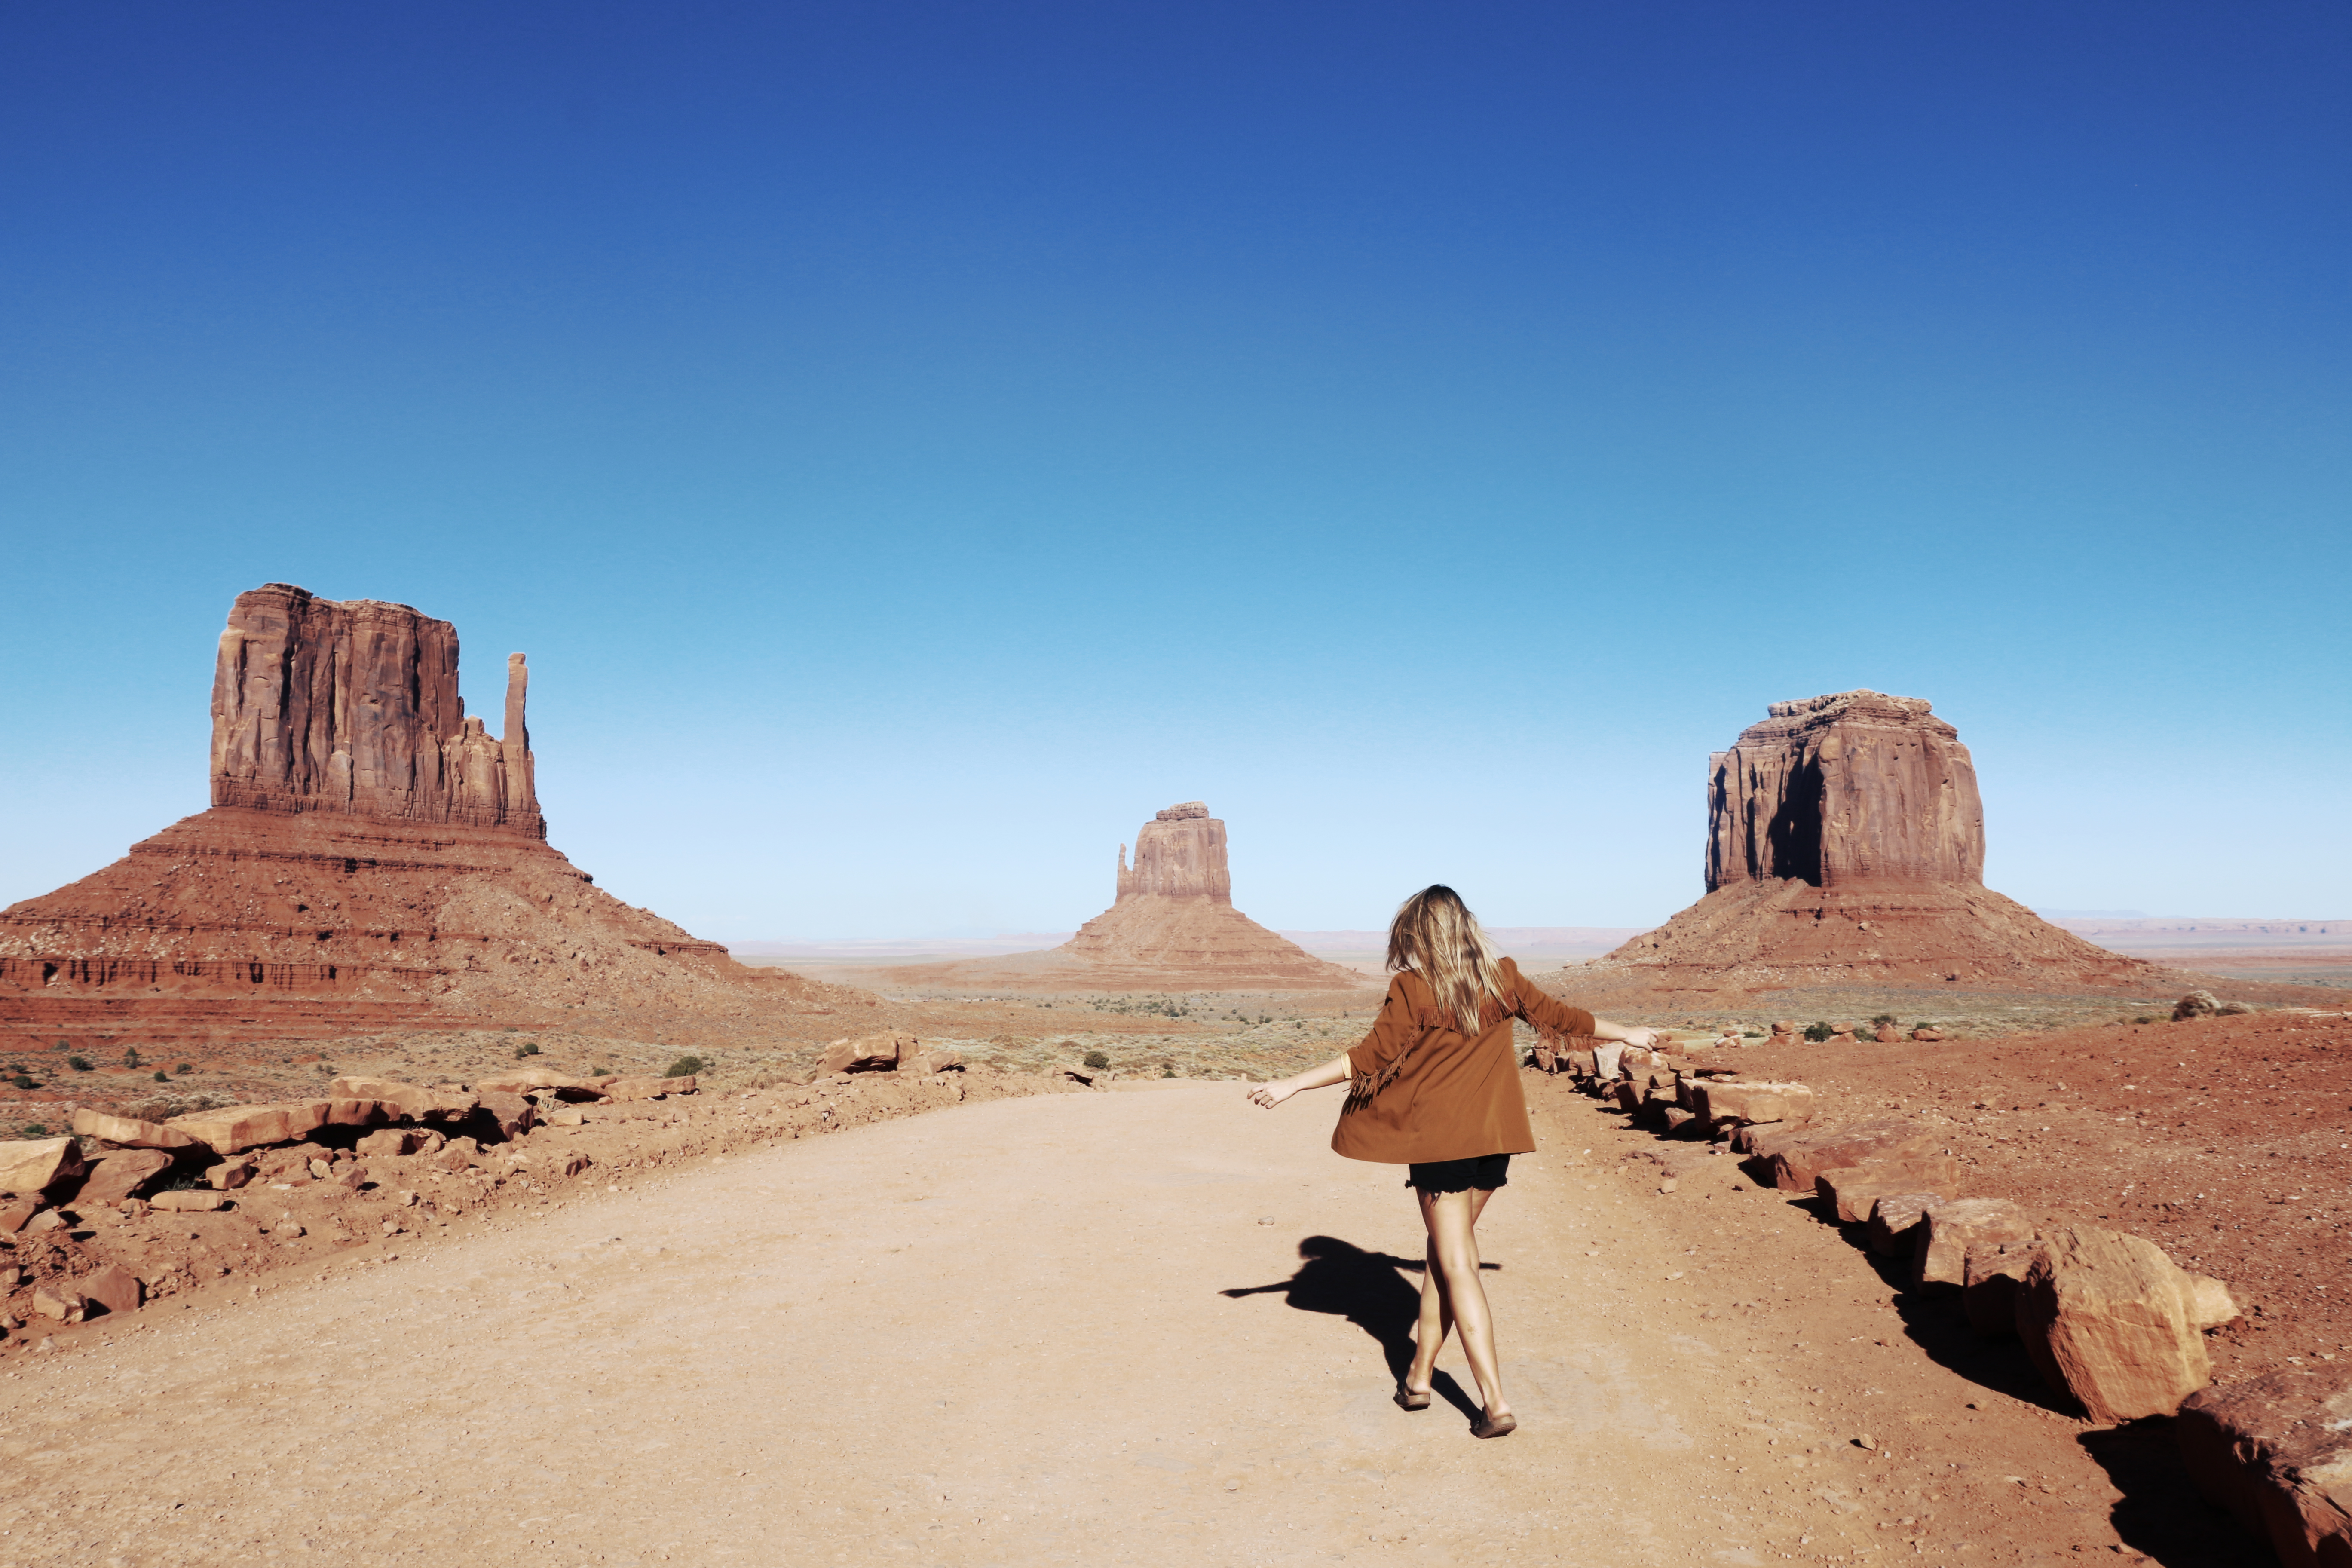 MONUMENT VALLEY: THE WILD WEST –